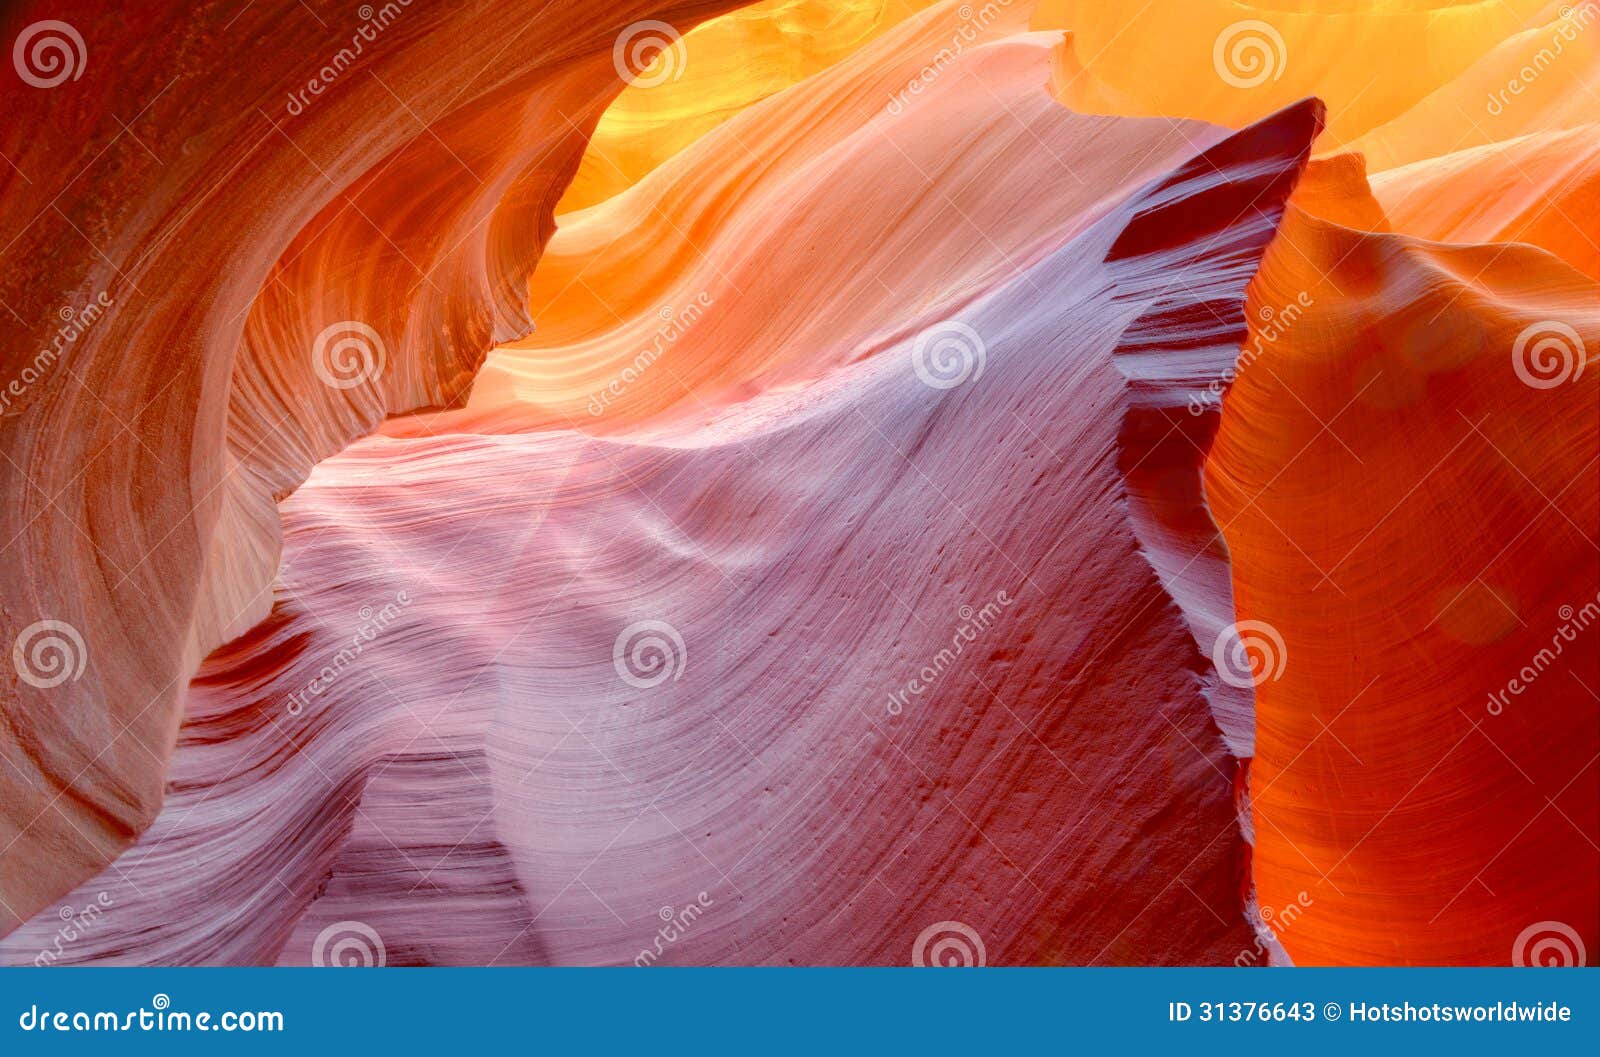 vibrant colors of eroded sandstone rock in slot canyon, antelope